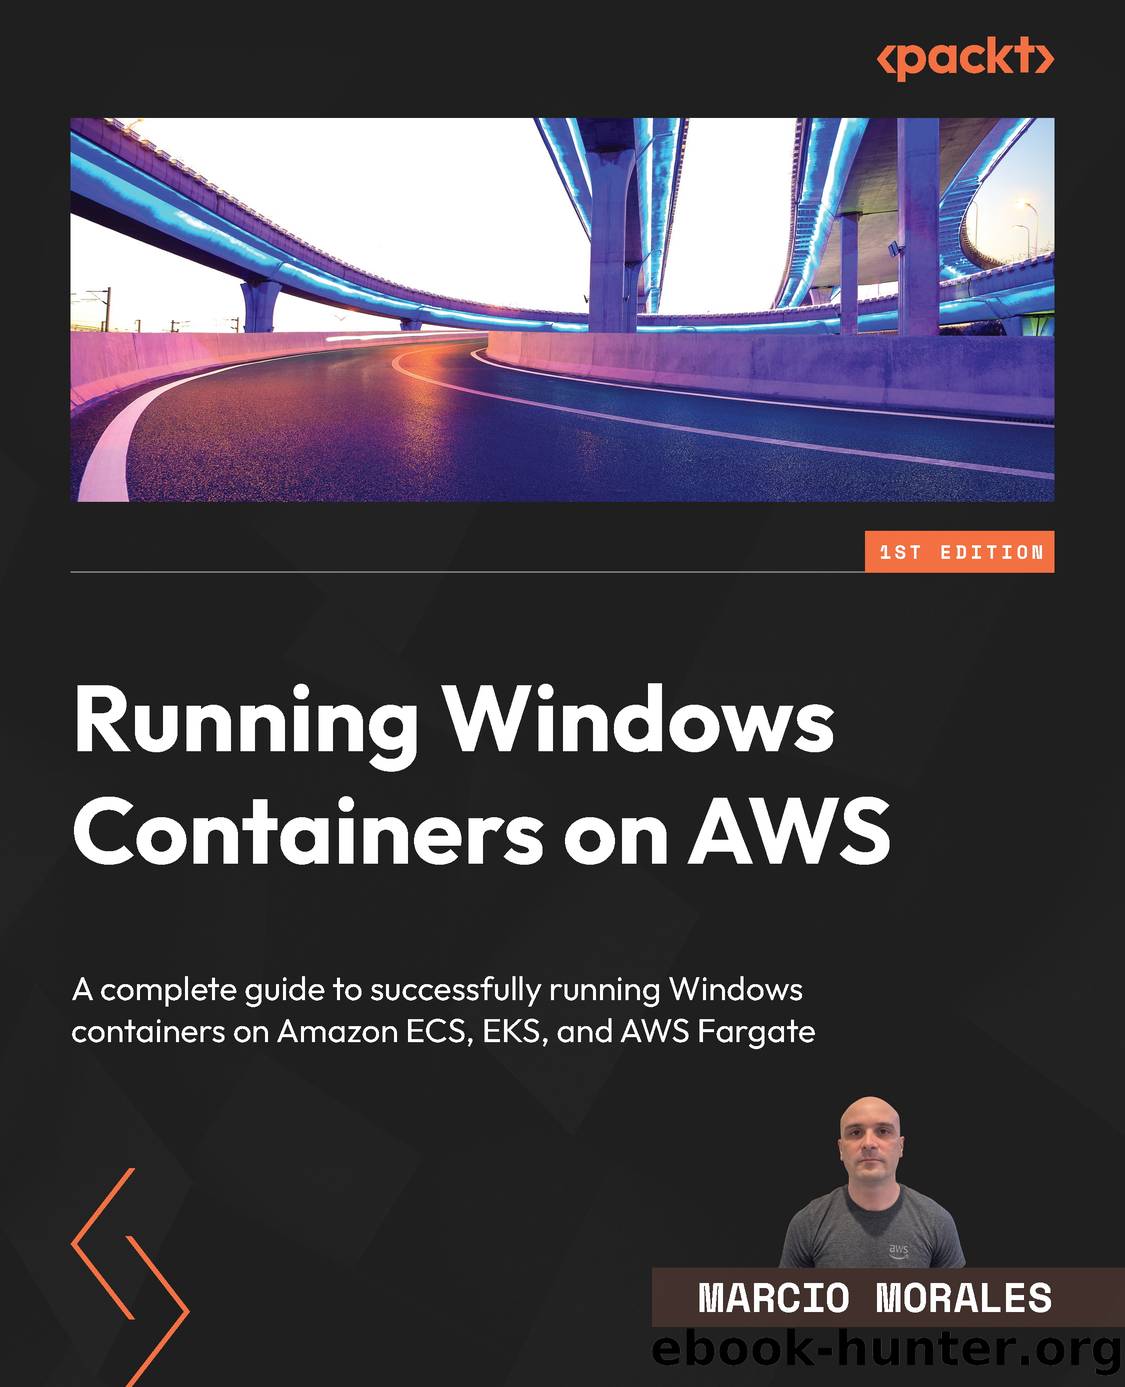 Running Windows Containers on AWS by Marcio Morales